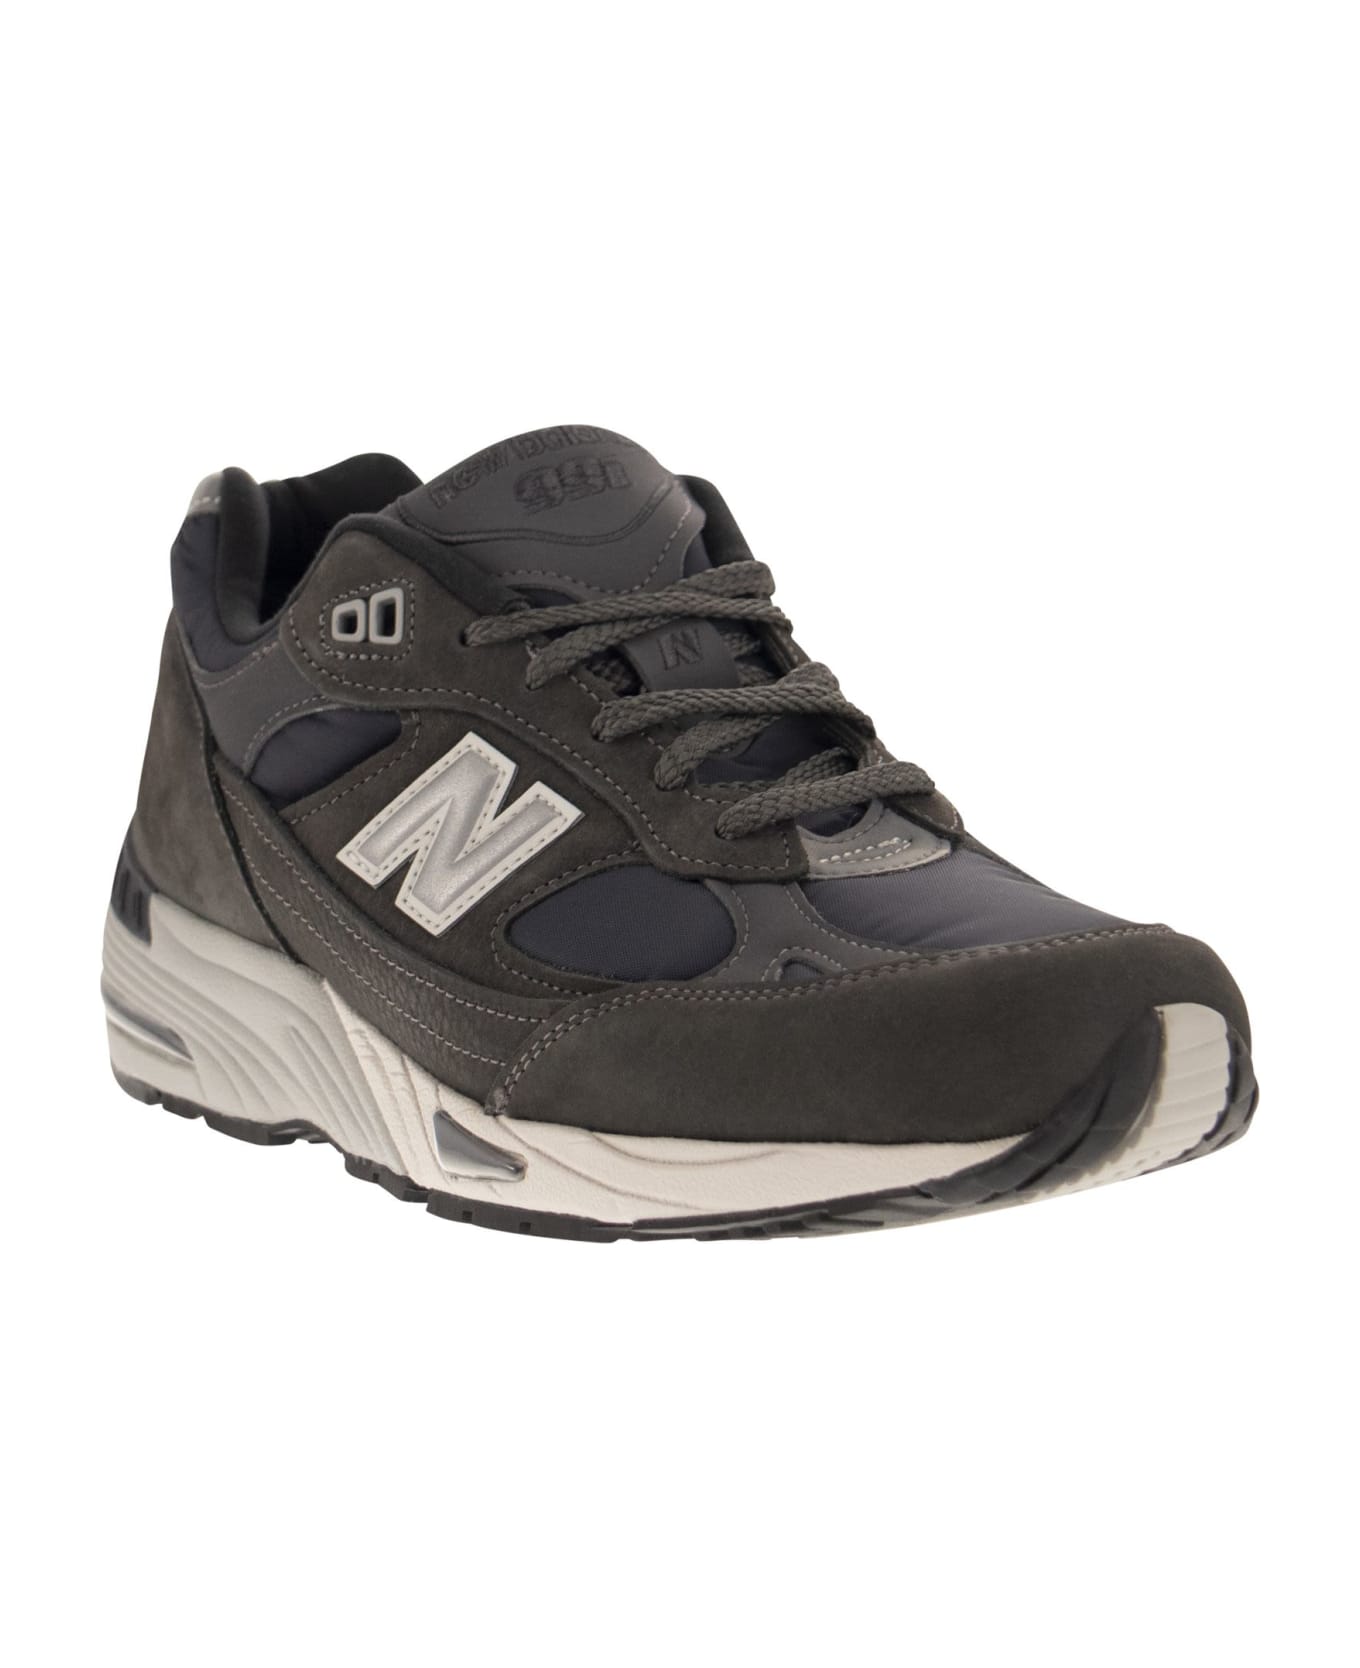 New Balance 991- Sneakers Lifestyle - Grey